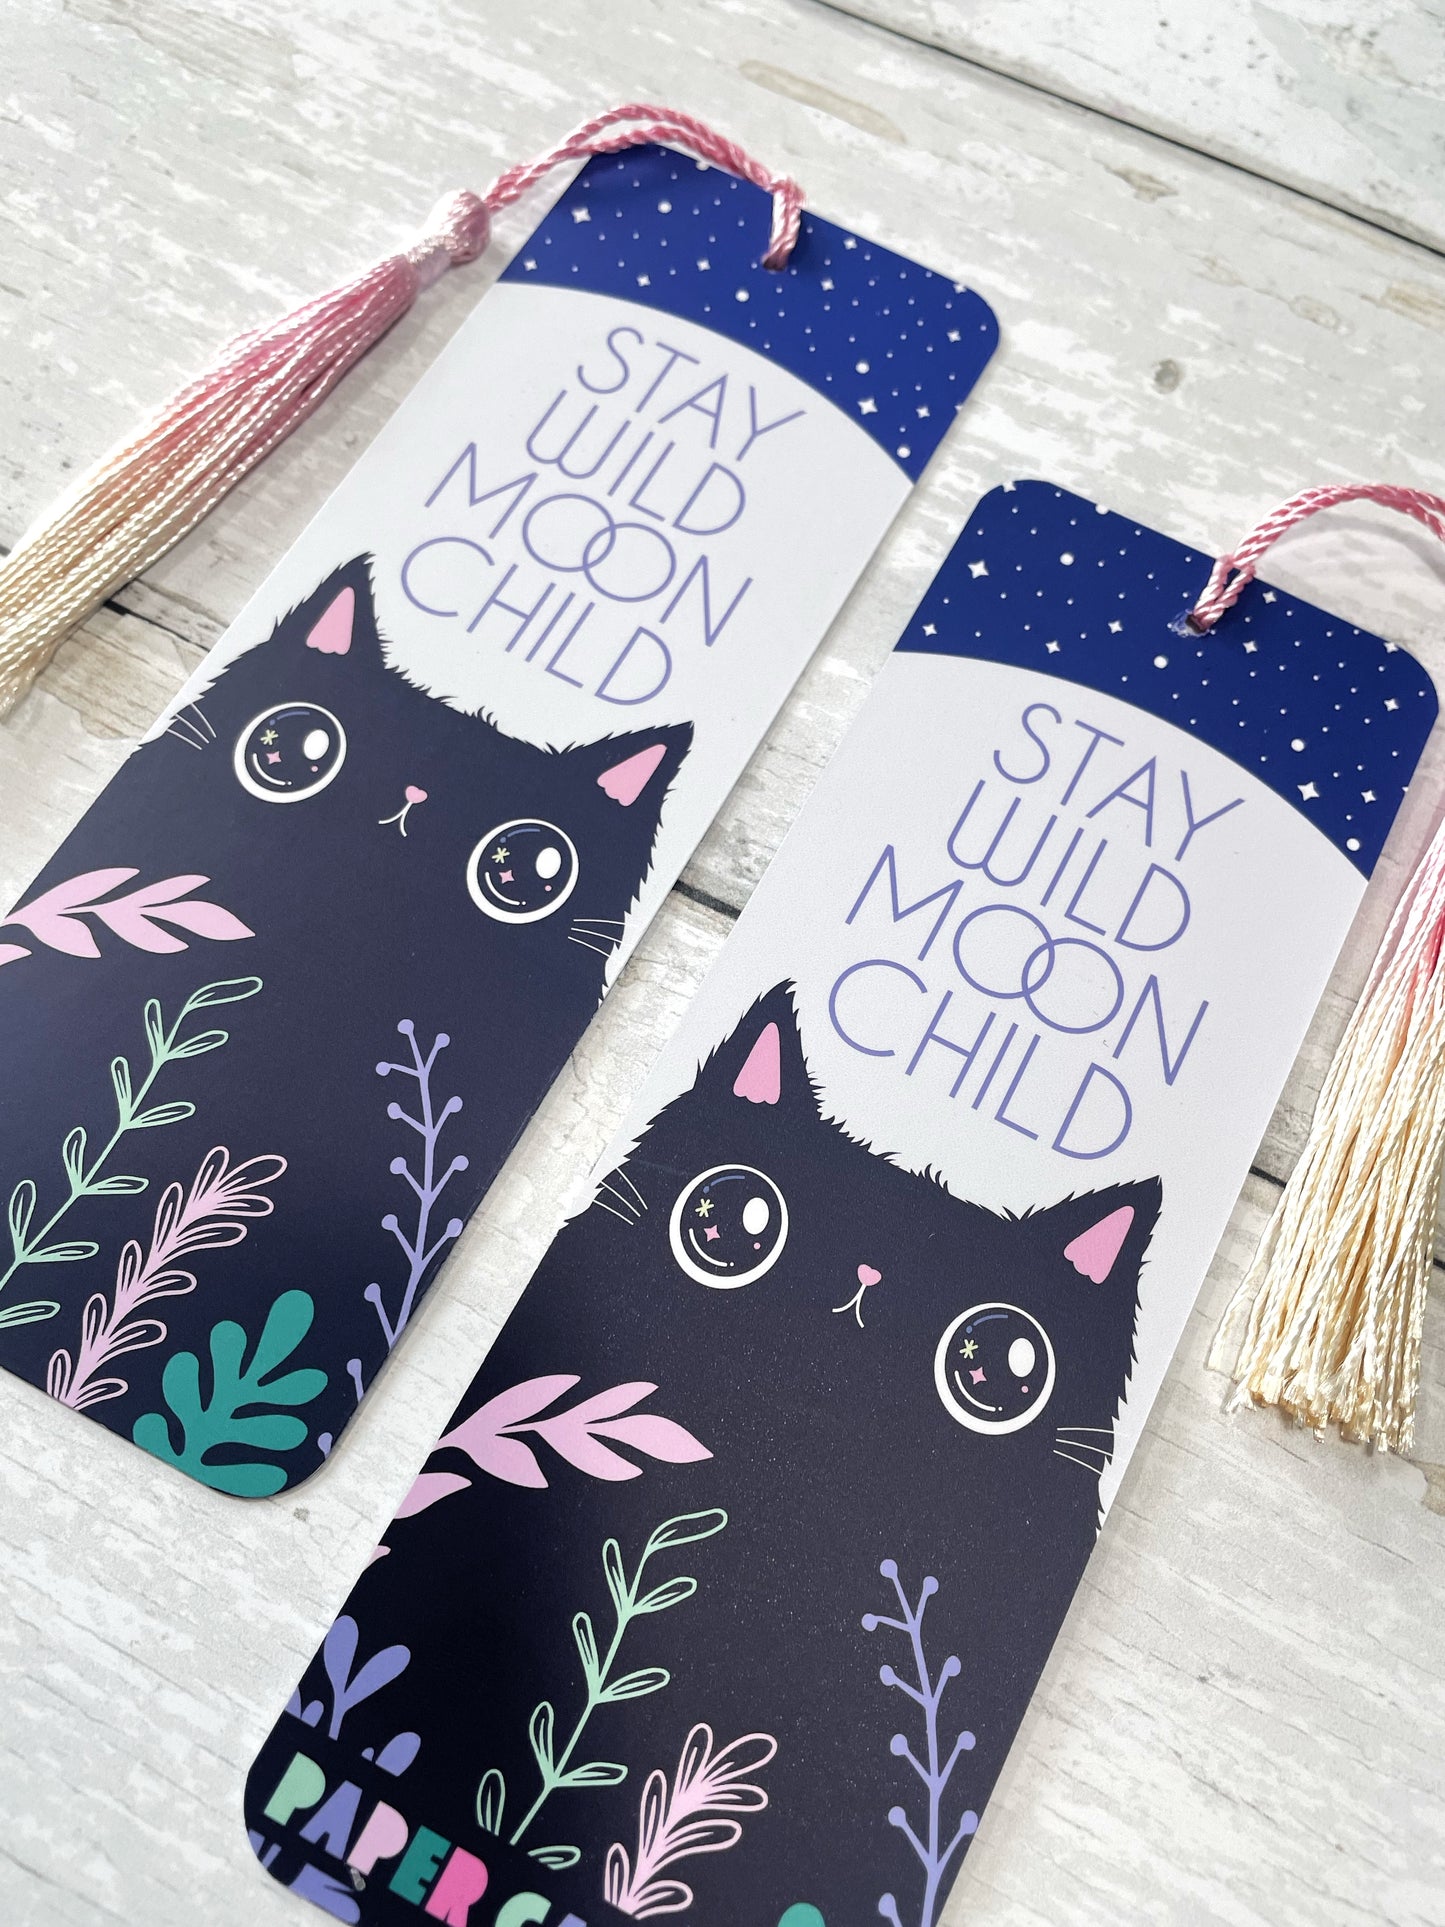 Stay Wild Moon Child bookmark with ombré tassel